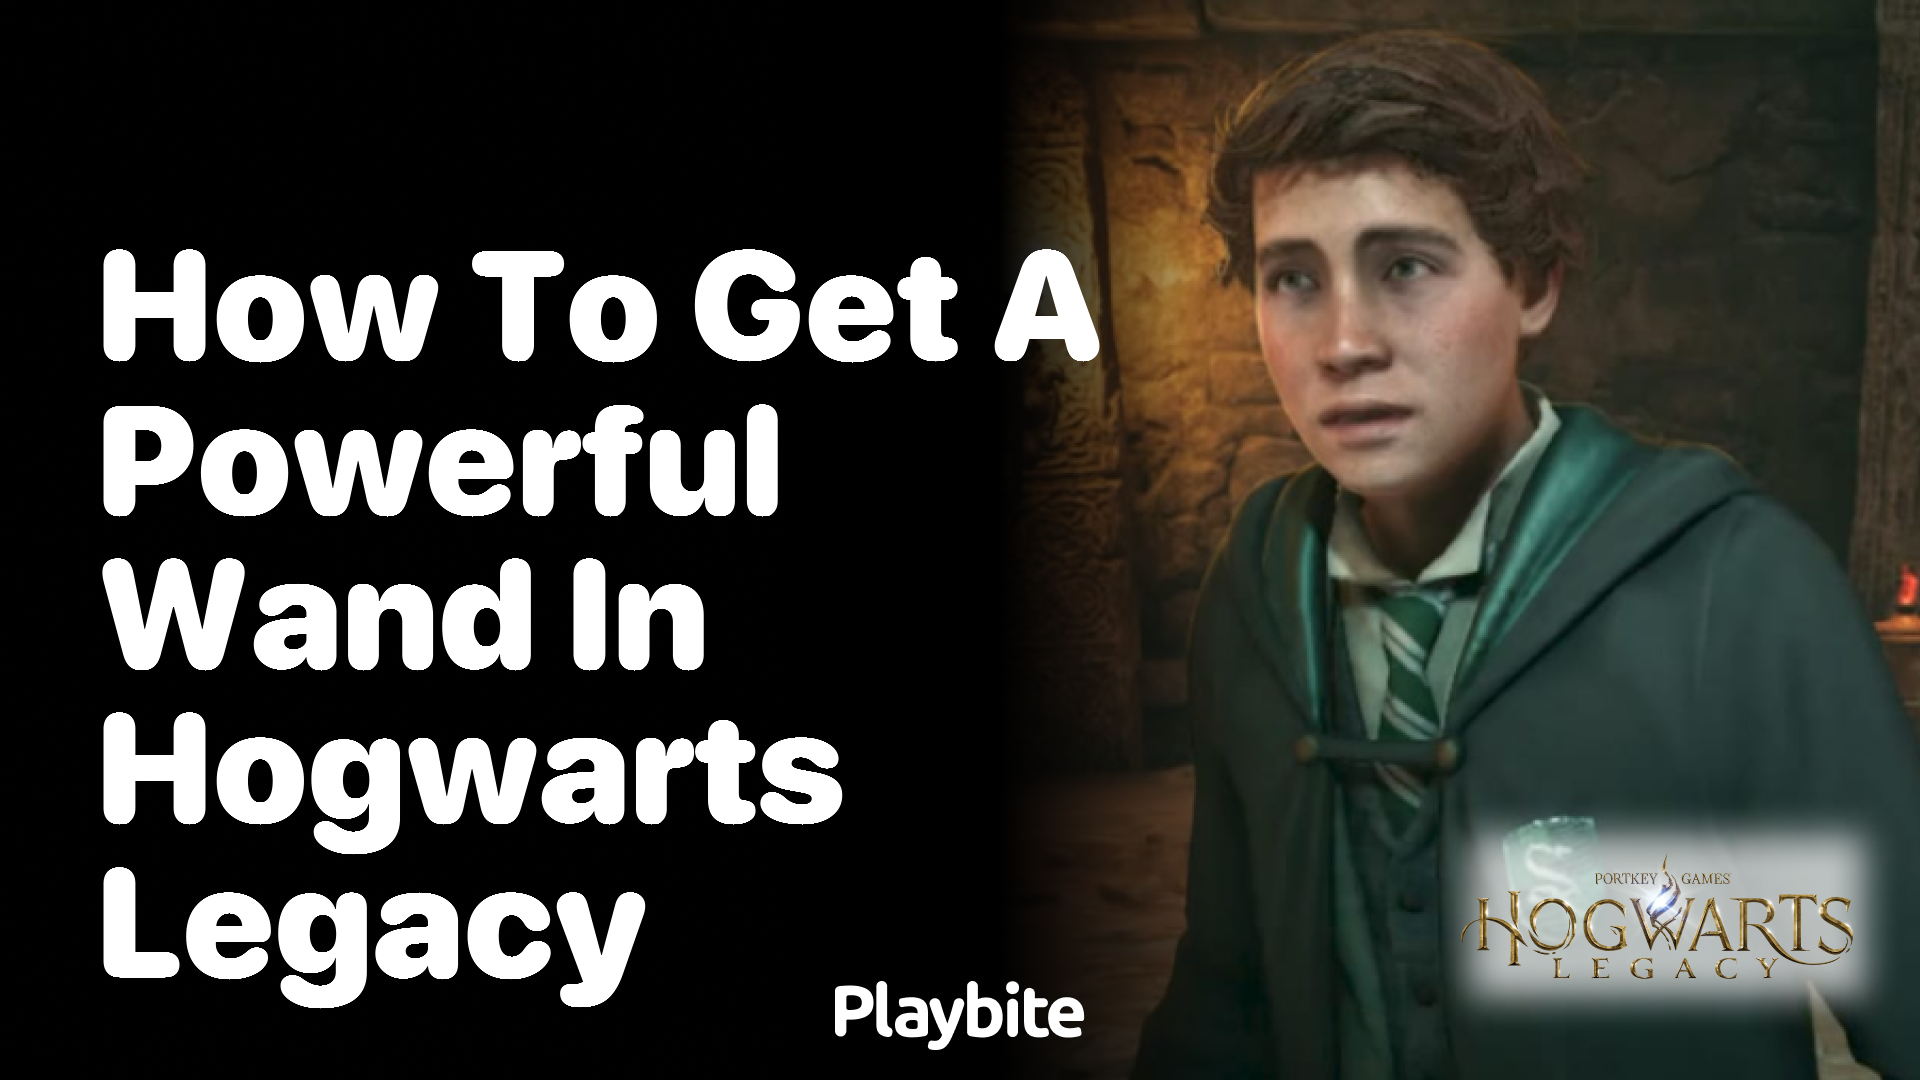 How to Get a Powerful Wand in Hogwarts Legacy